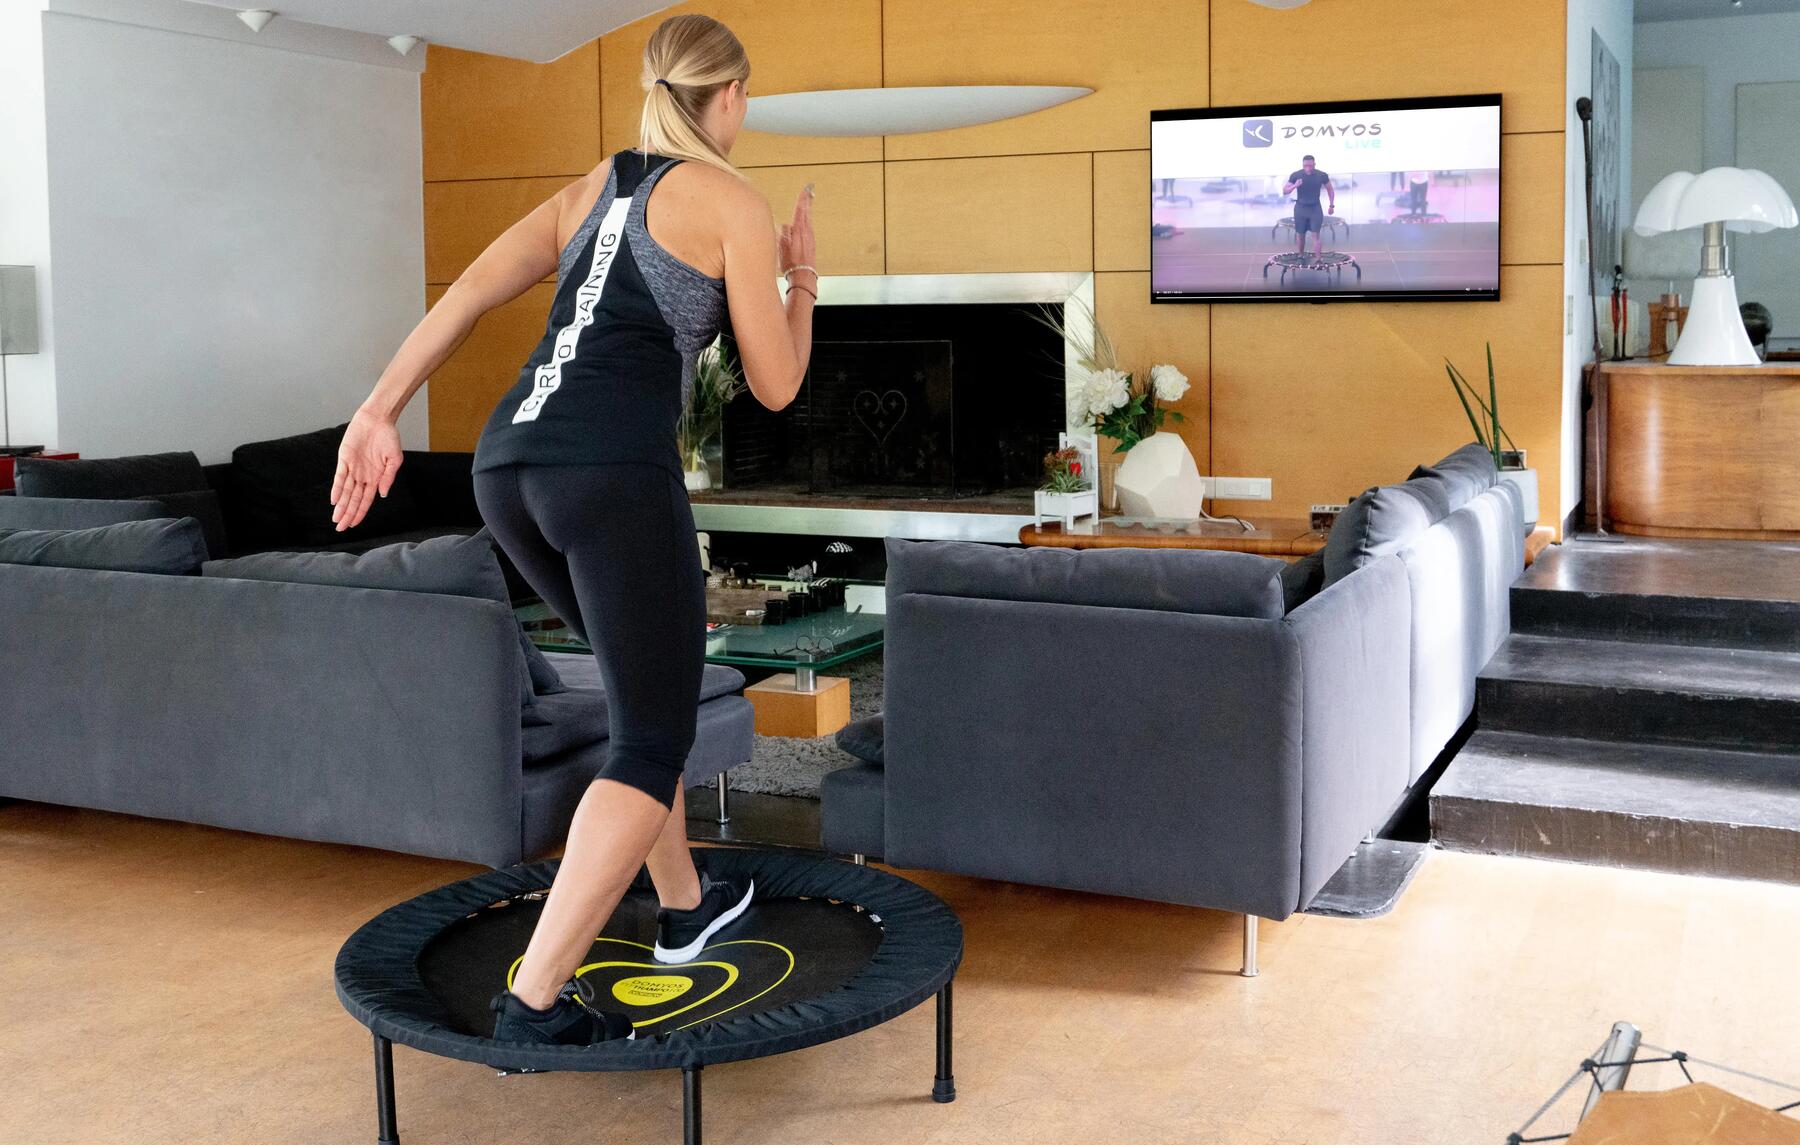 A woman using a mini trampoline in her living room watching a workout video on her TV